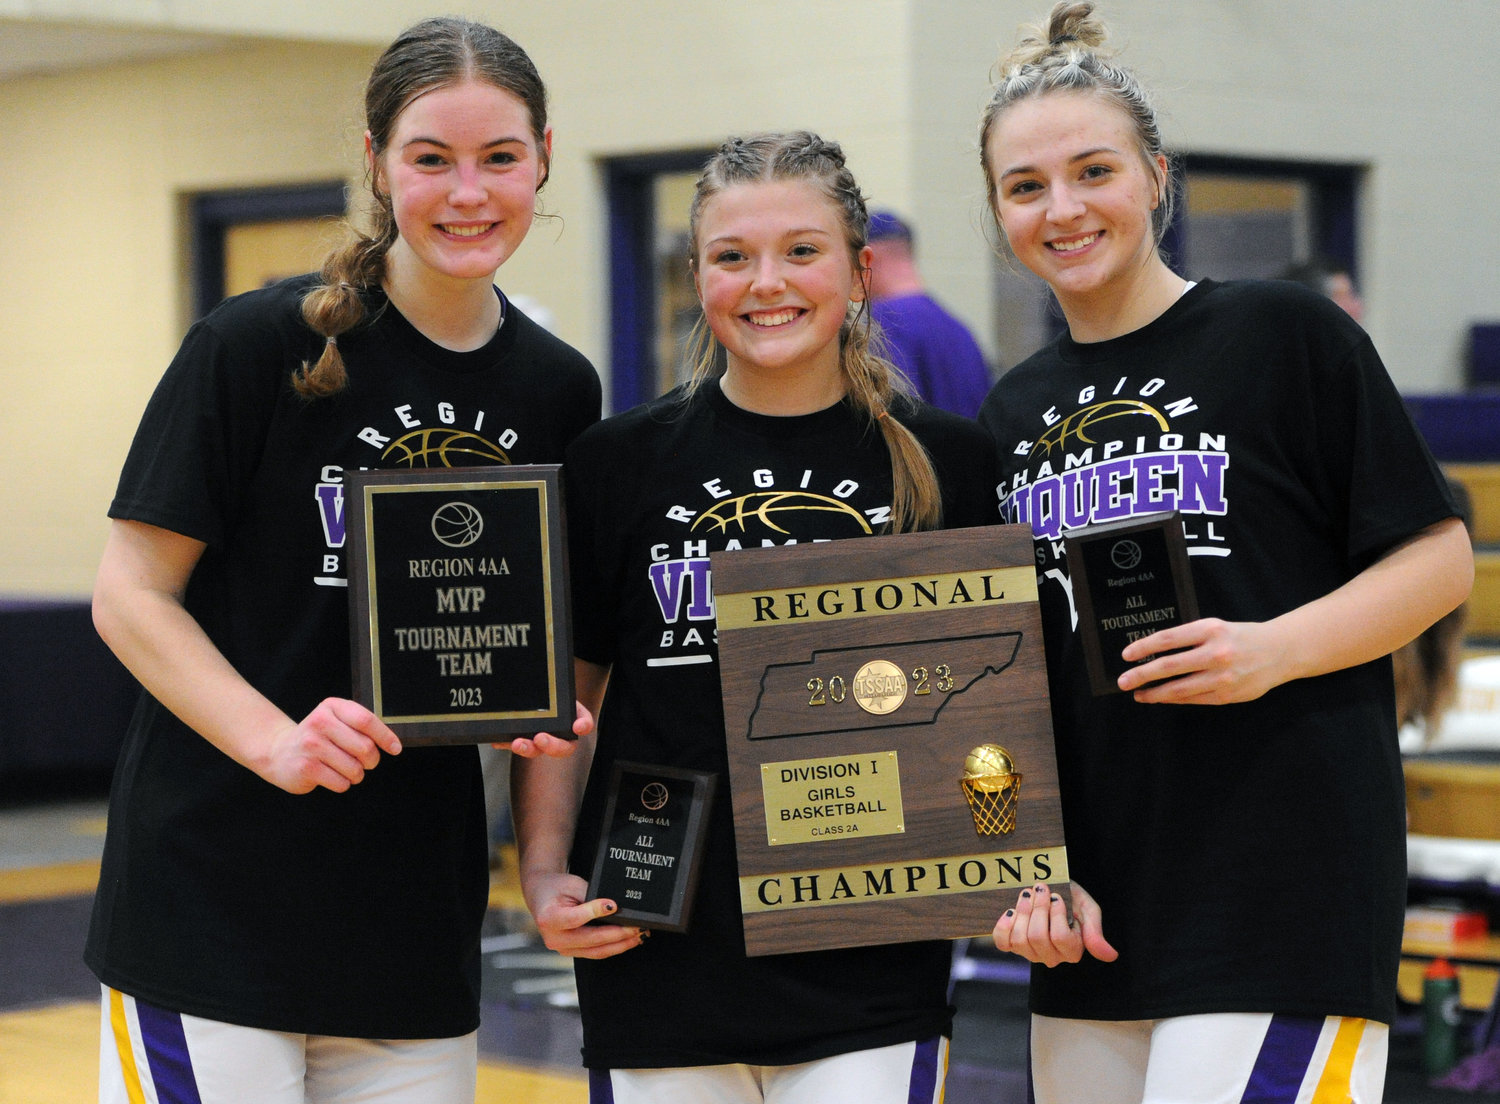 For their efforts in the Region 4-AA tournament, Zoey Dixon (middle) and Haley Michell (right) were named to the All-Region 4-AA team, while M.J. Simmons (left) was named tournament MVP.